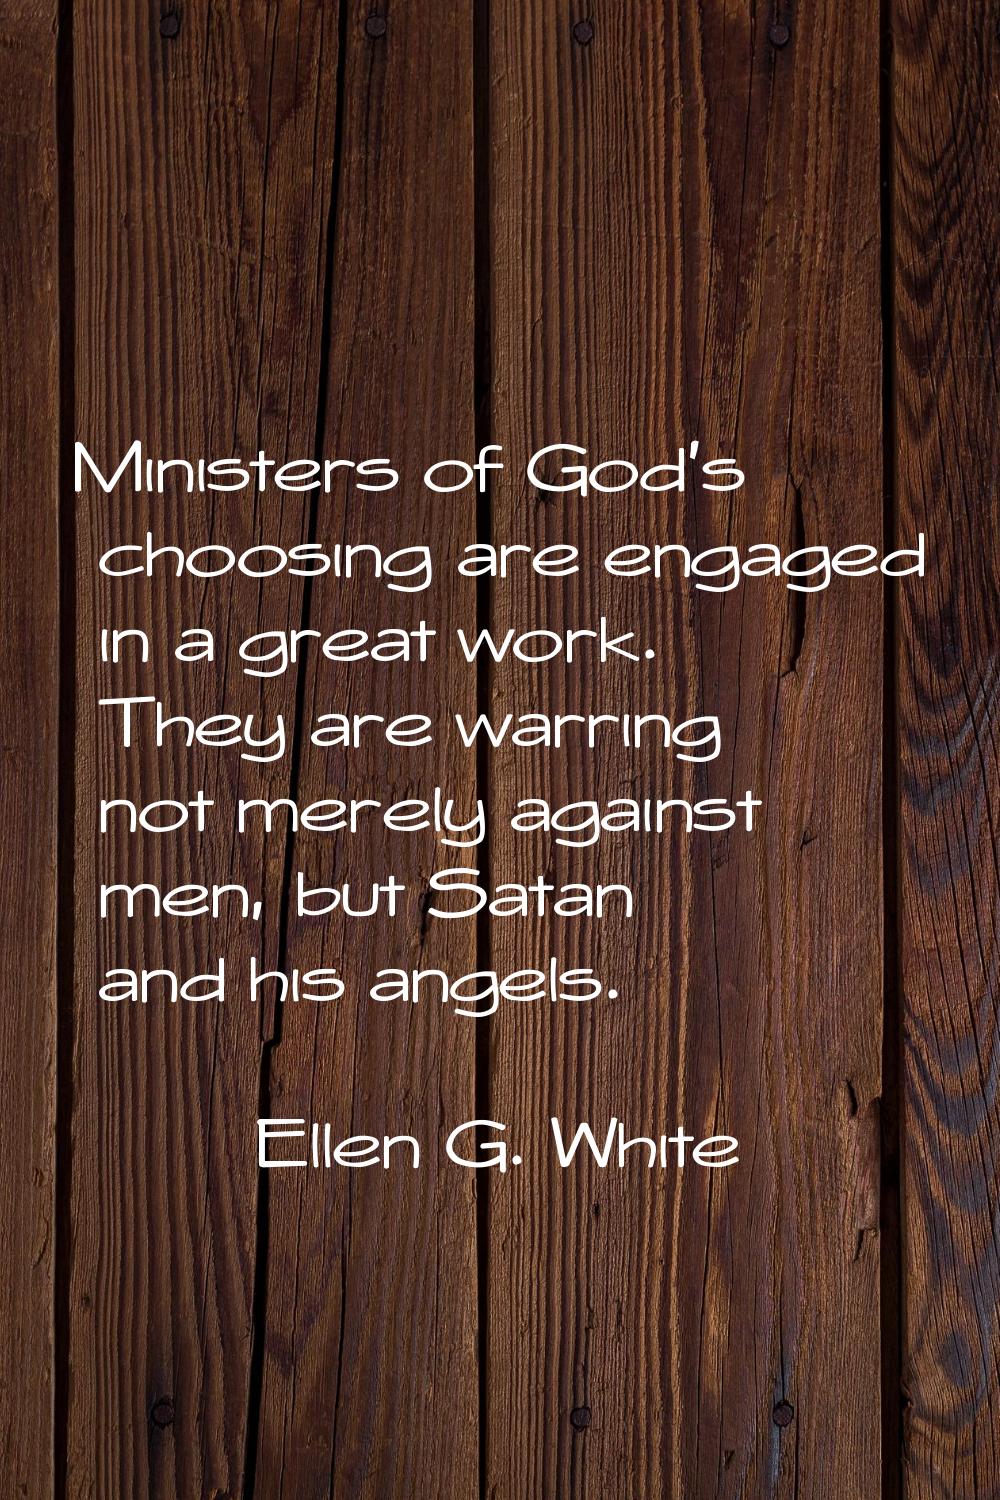 Ministers of God's choosing are engaged in a great work. They are warring not merely against men, b